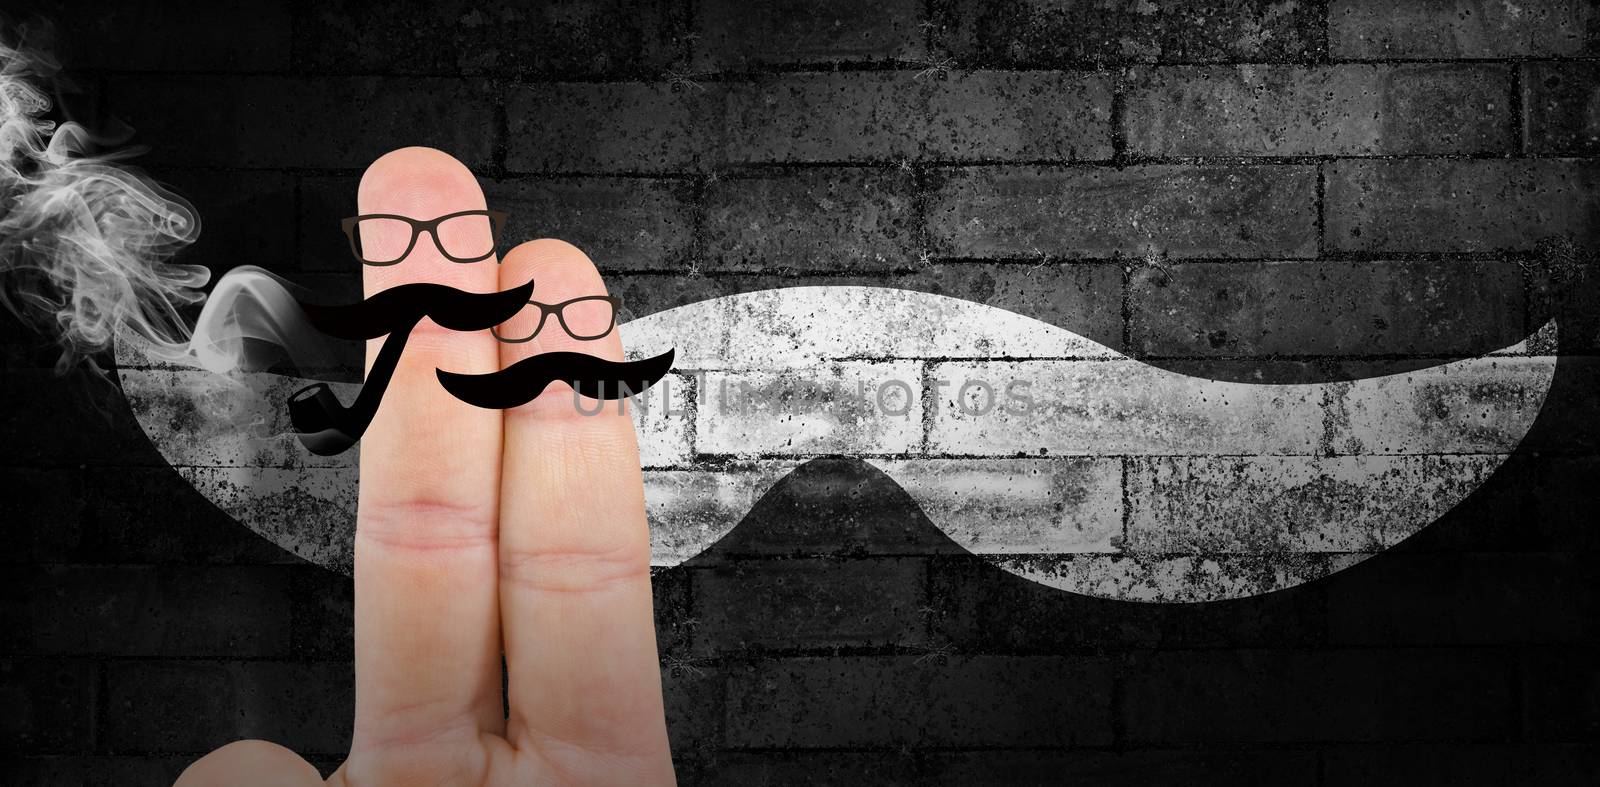 Fingers with mustache against texture of bricks wall